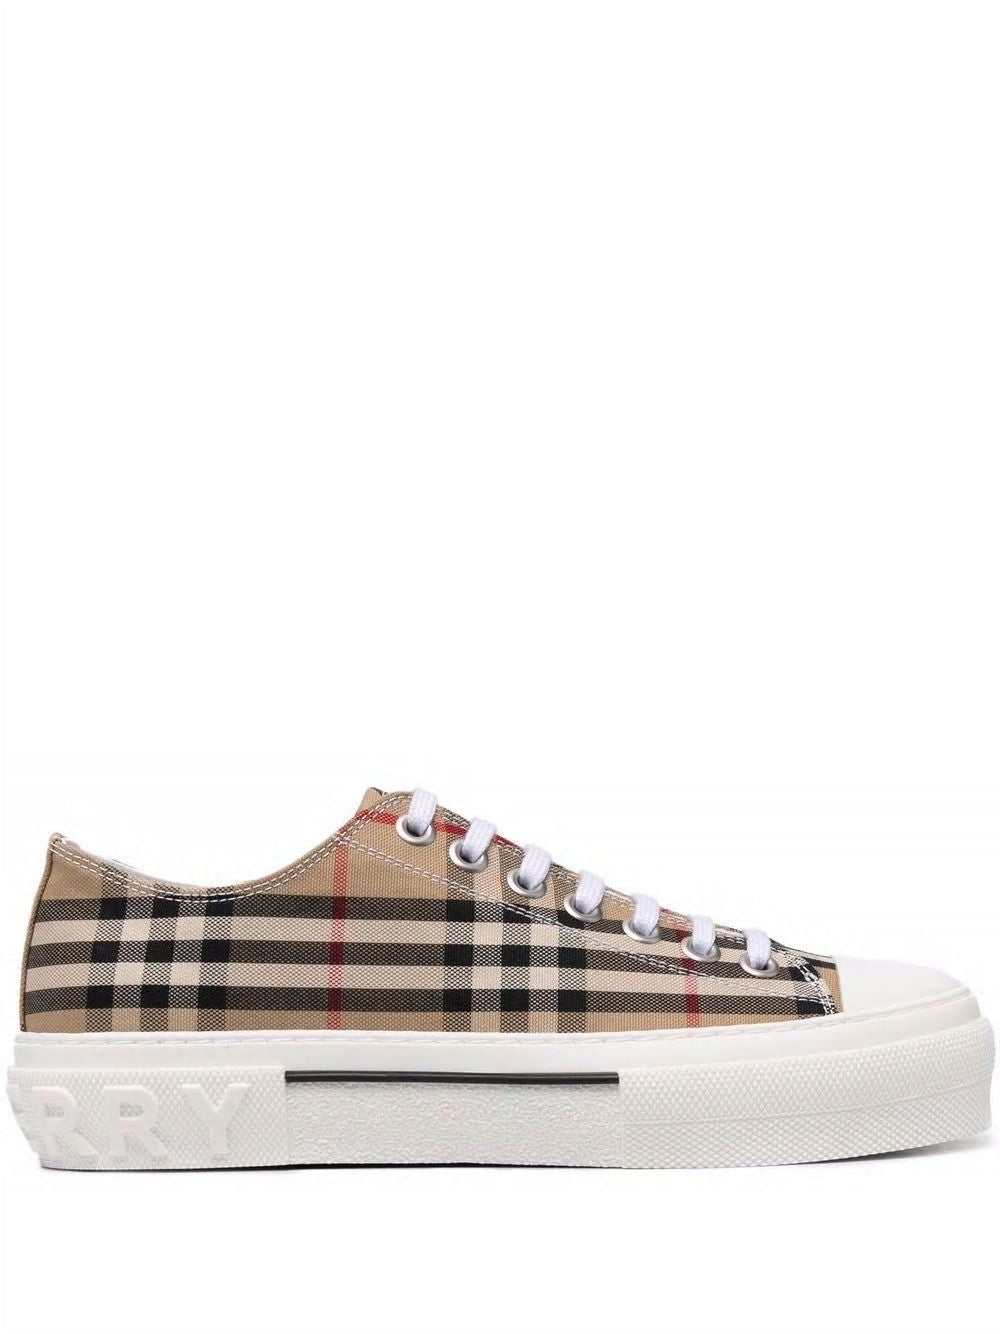 BURBERRY Arch Beige Cotton Sneakers for Men